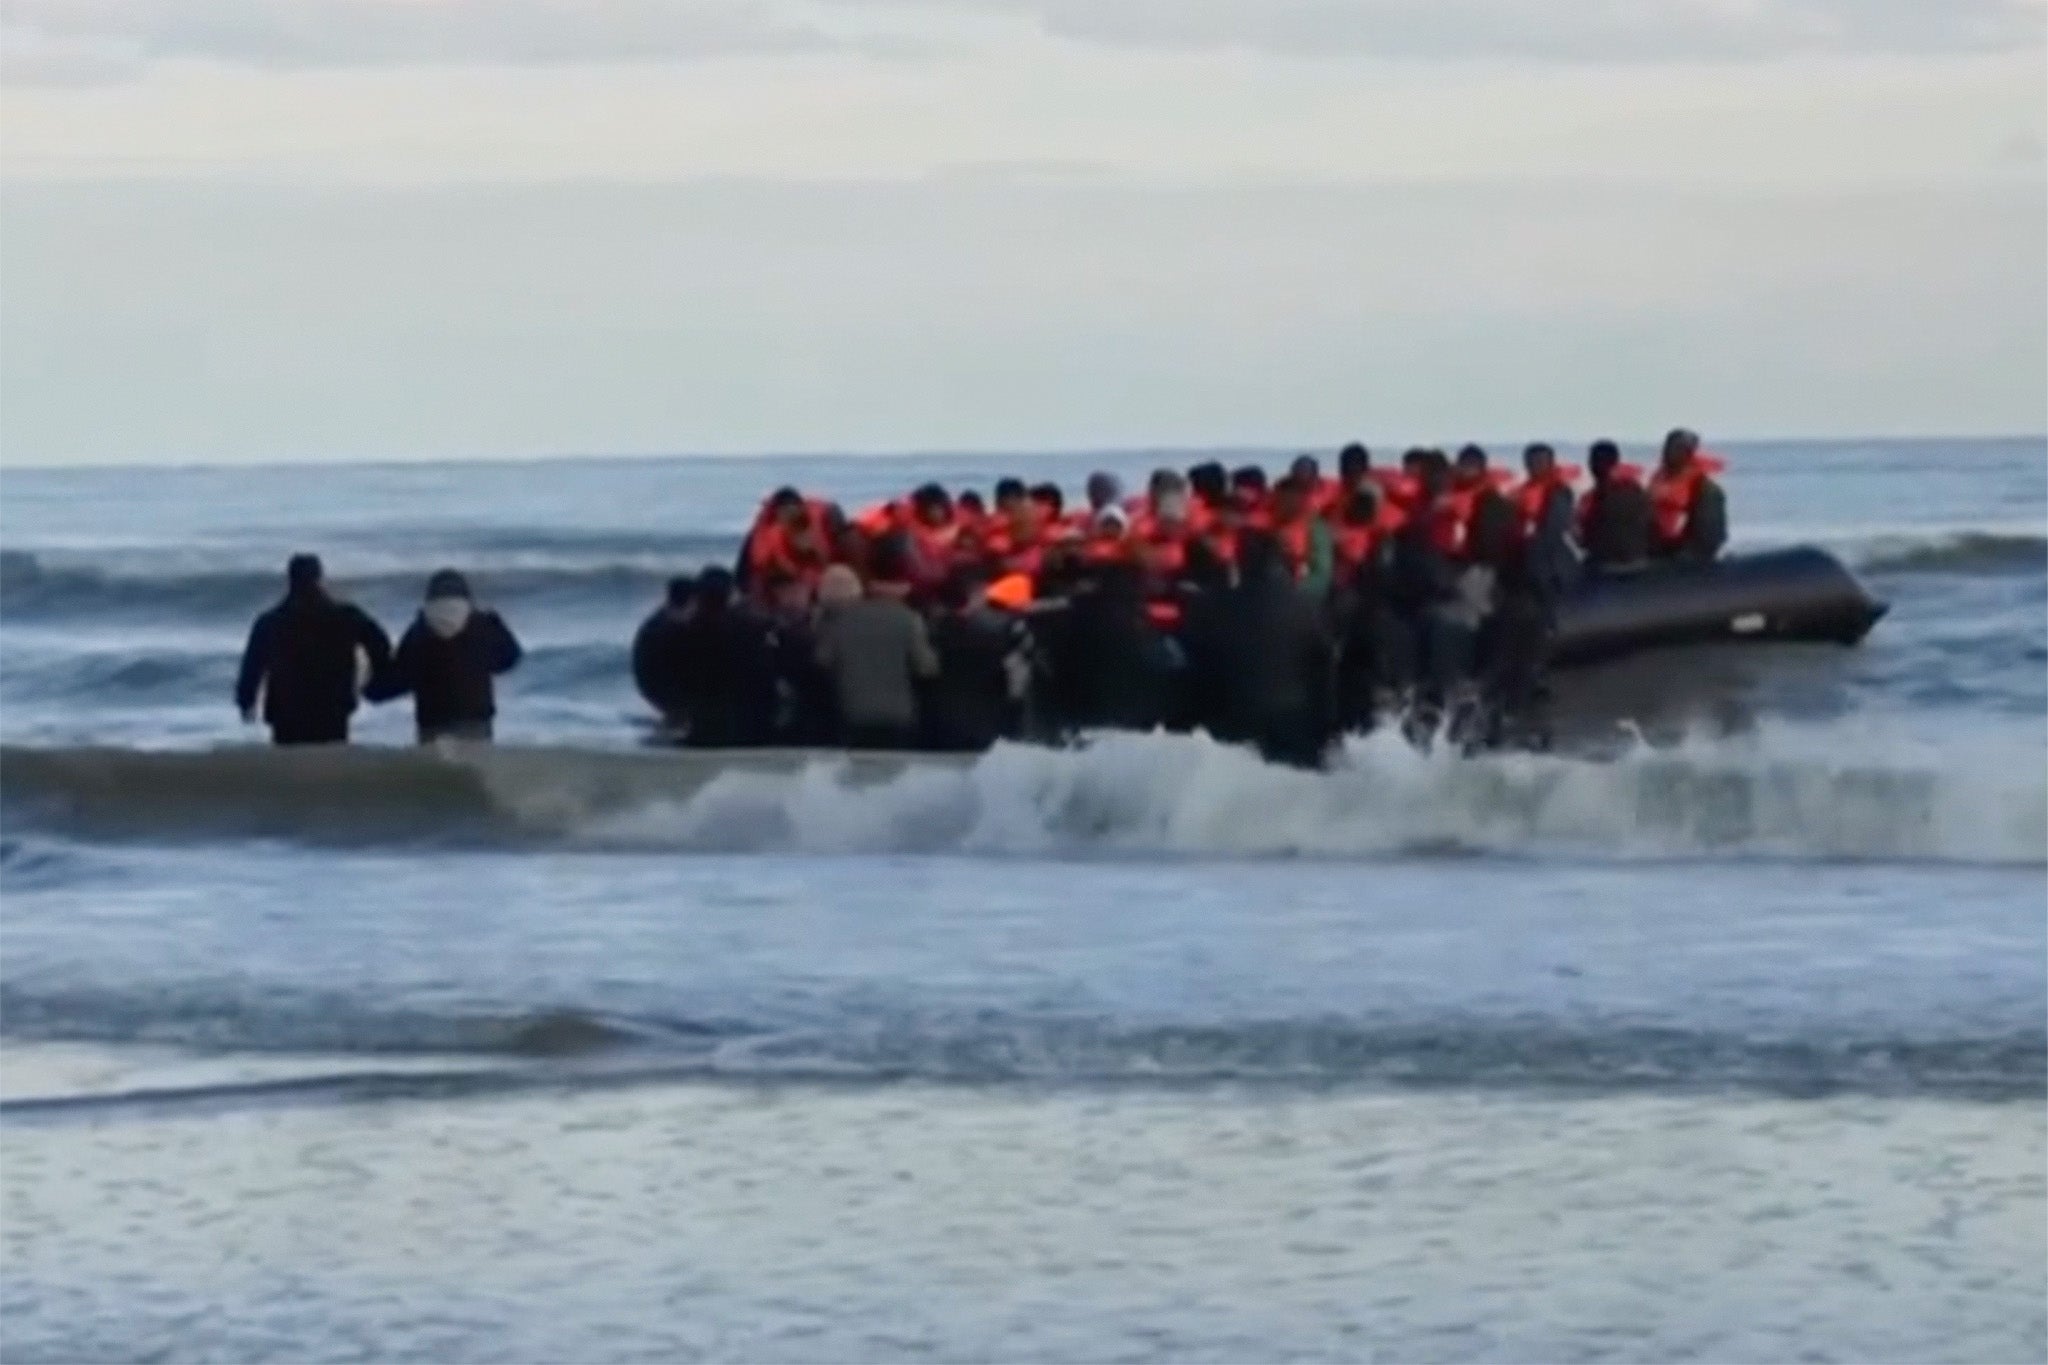 Footage from BBC News shows migrants in a small boat at Dunkirk on Tuesday morning after the French coast guard announced five people had died while trying to cross the Channel in a small dinghy